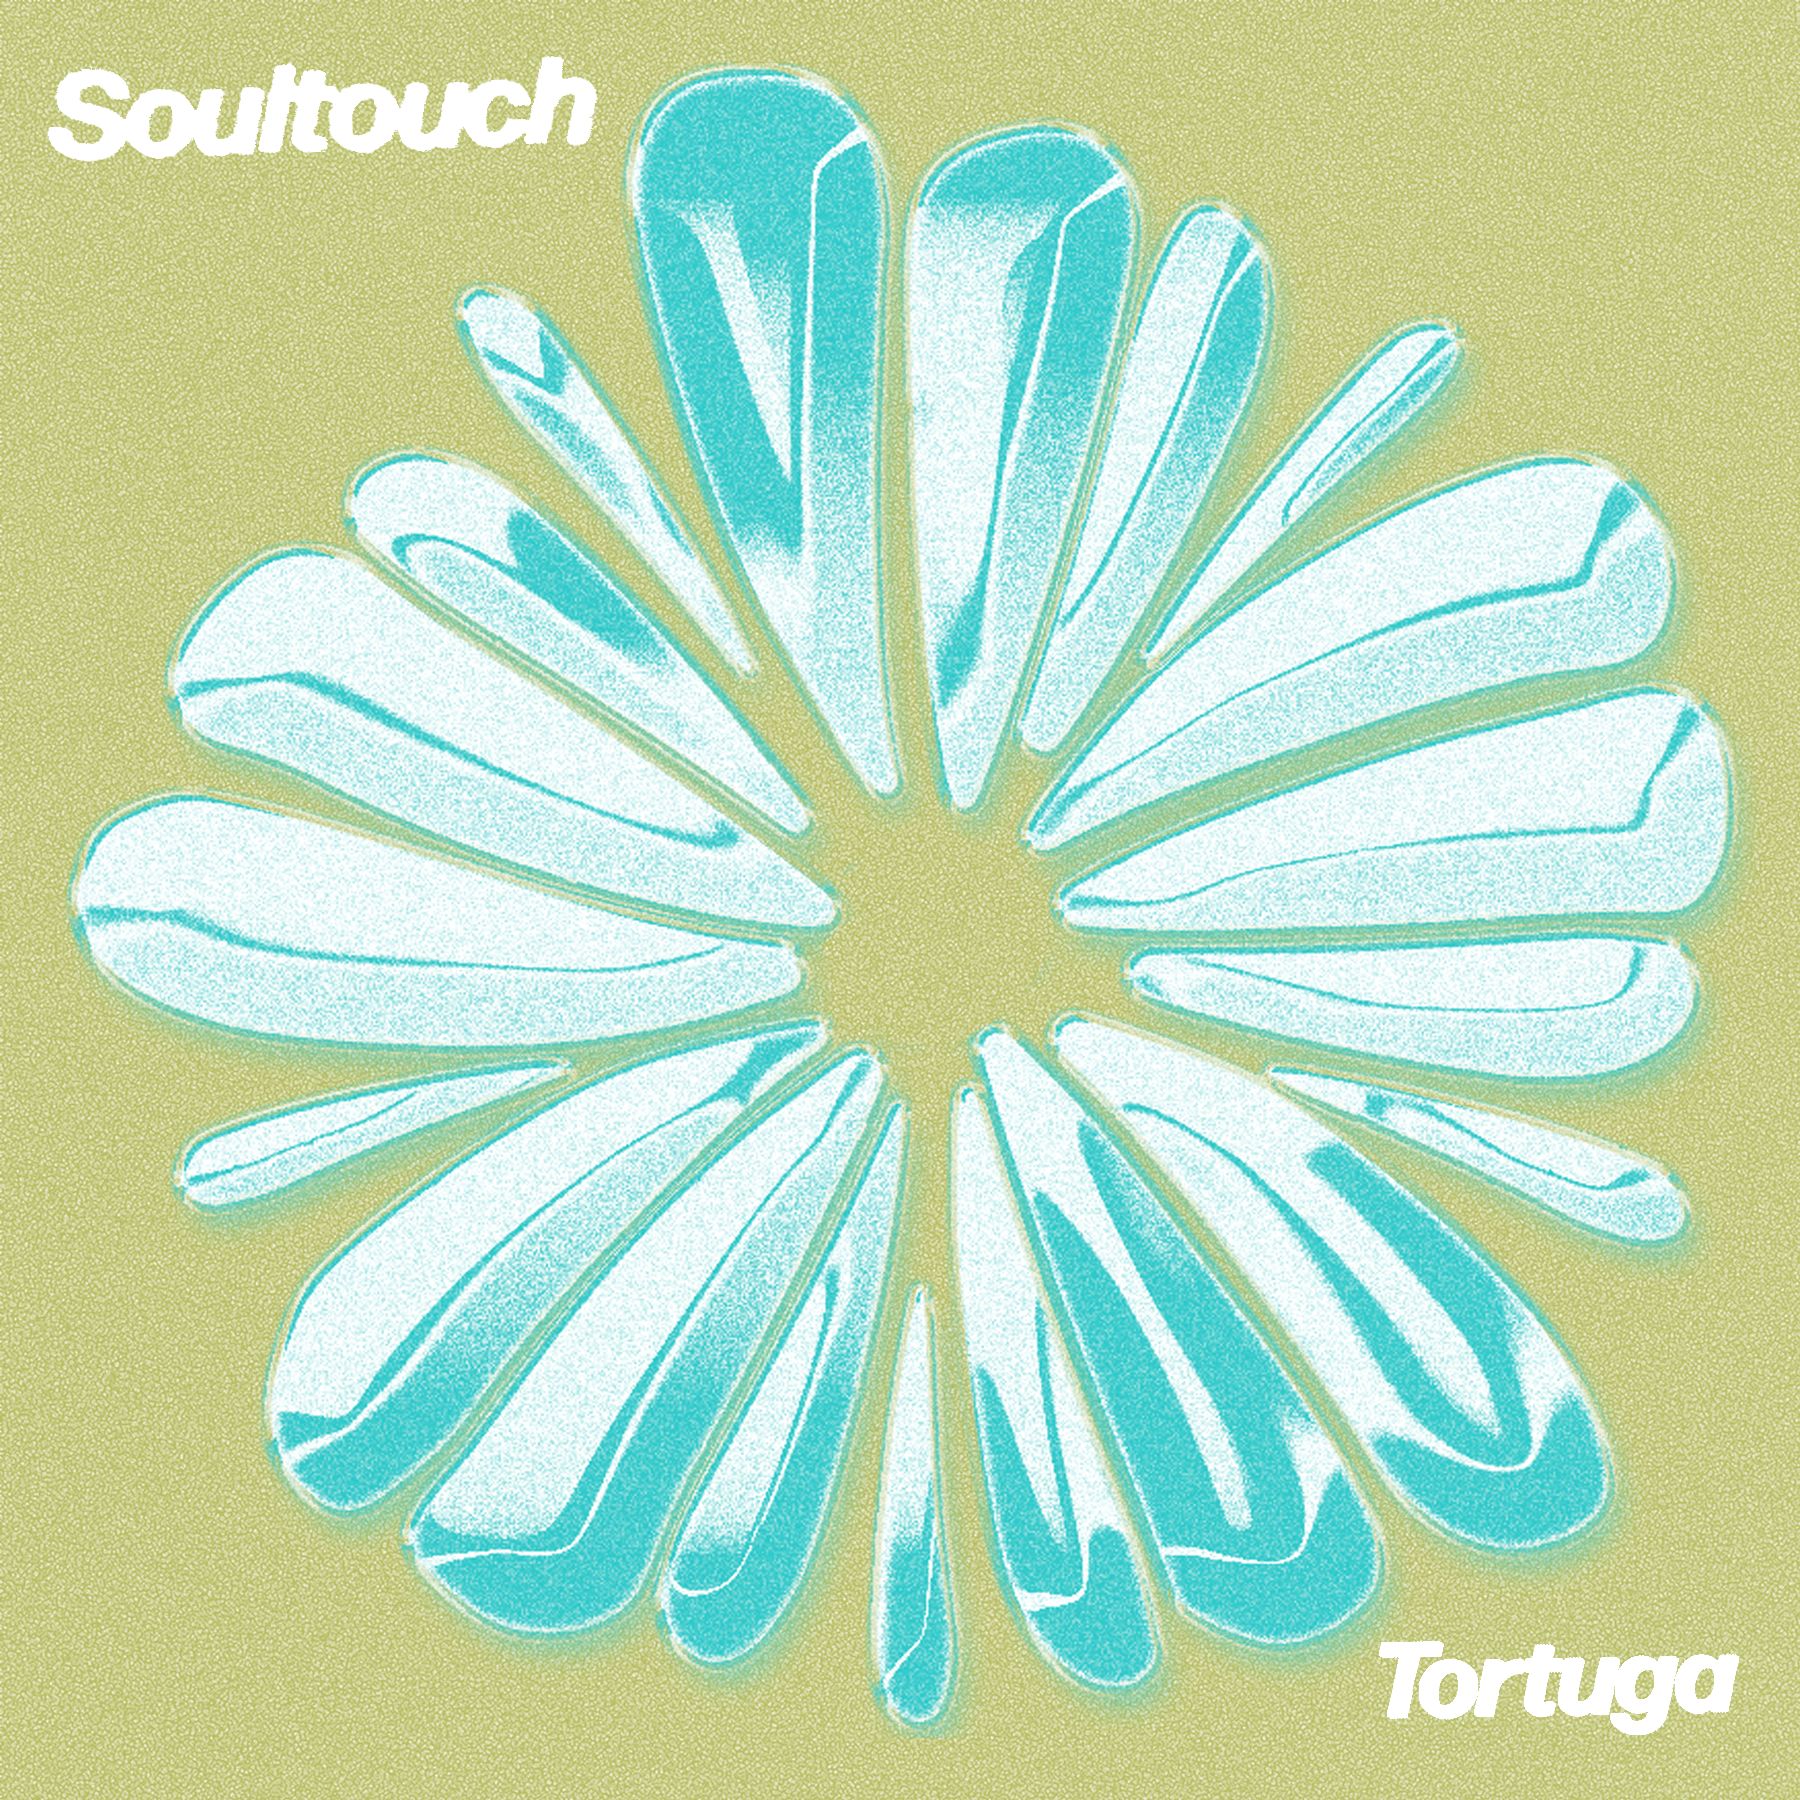 Download PREMIERE : Tortuga - Soultouch